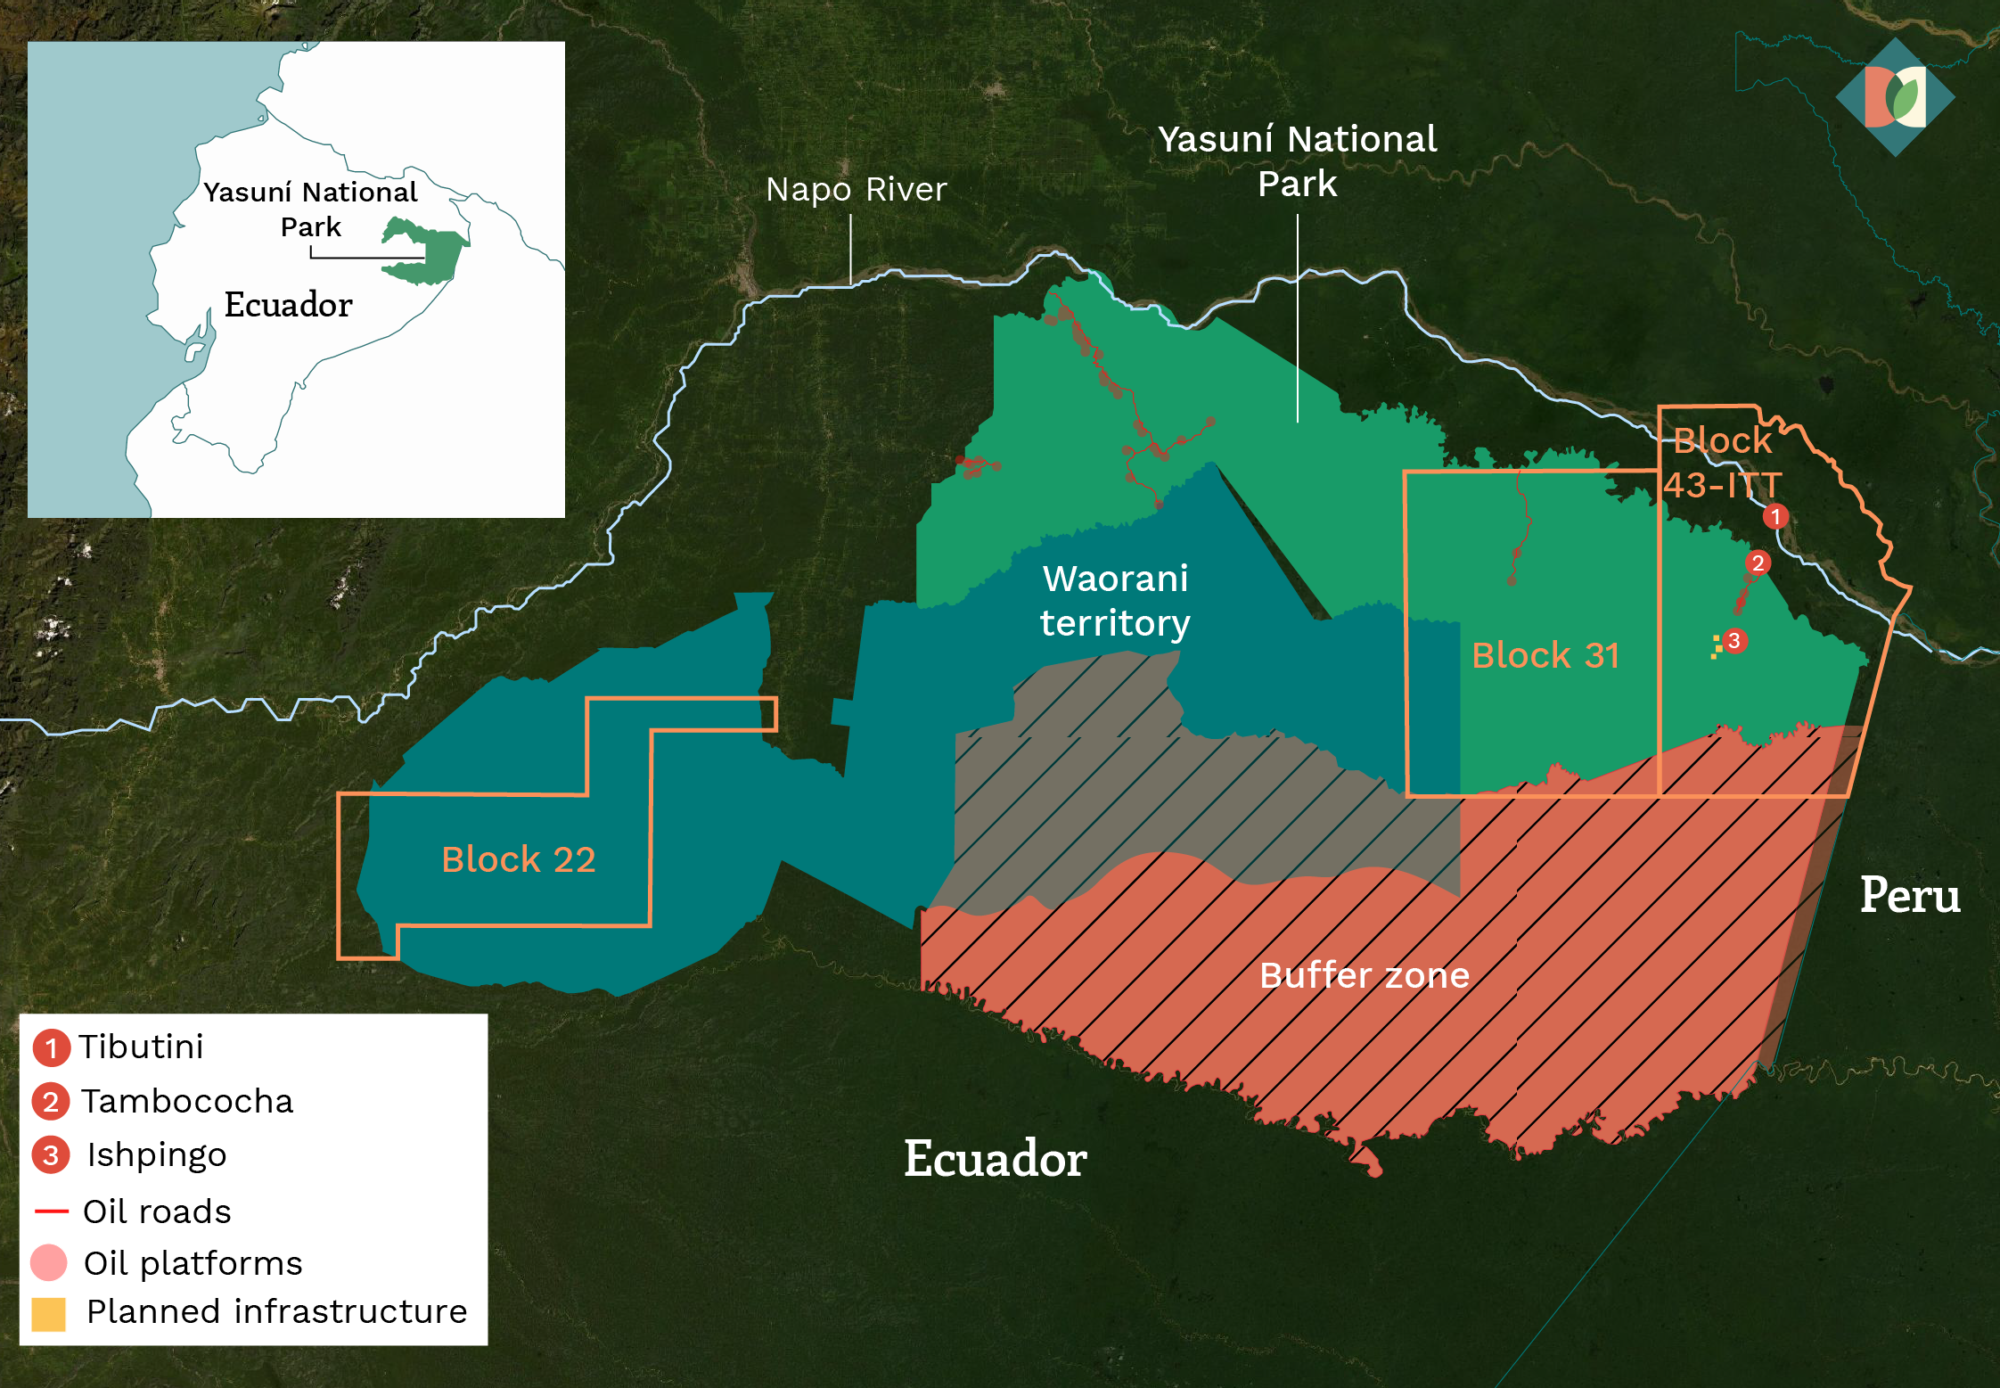 Map showing the location of Yasuní National Park, oil blocks 22, 31 and 43-ITT, the buffer zone and Waorani territory.